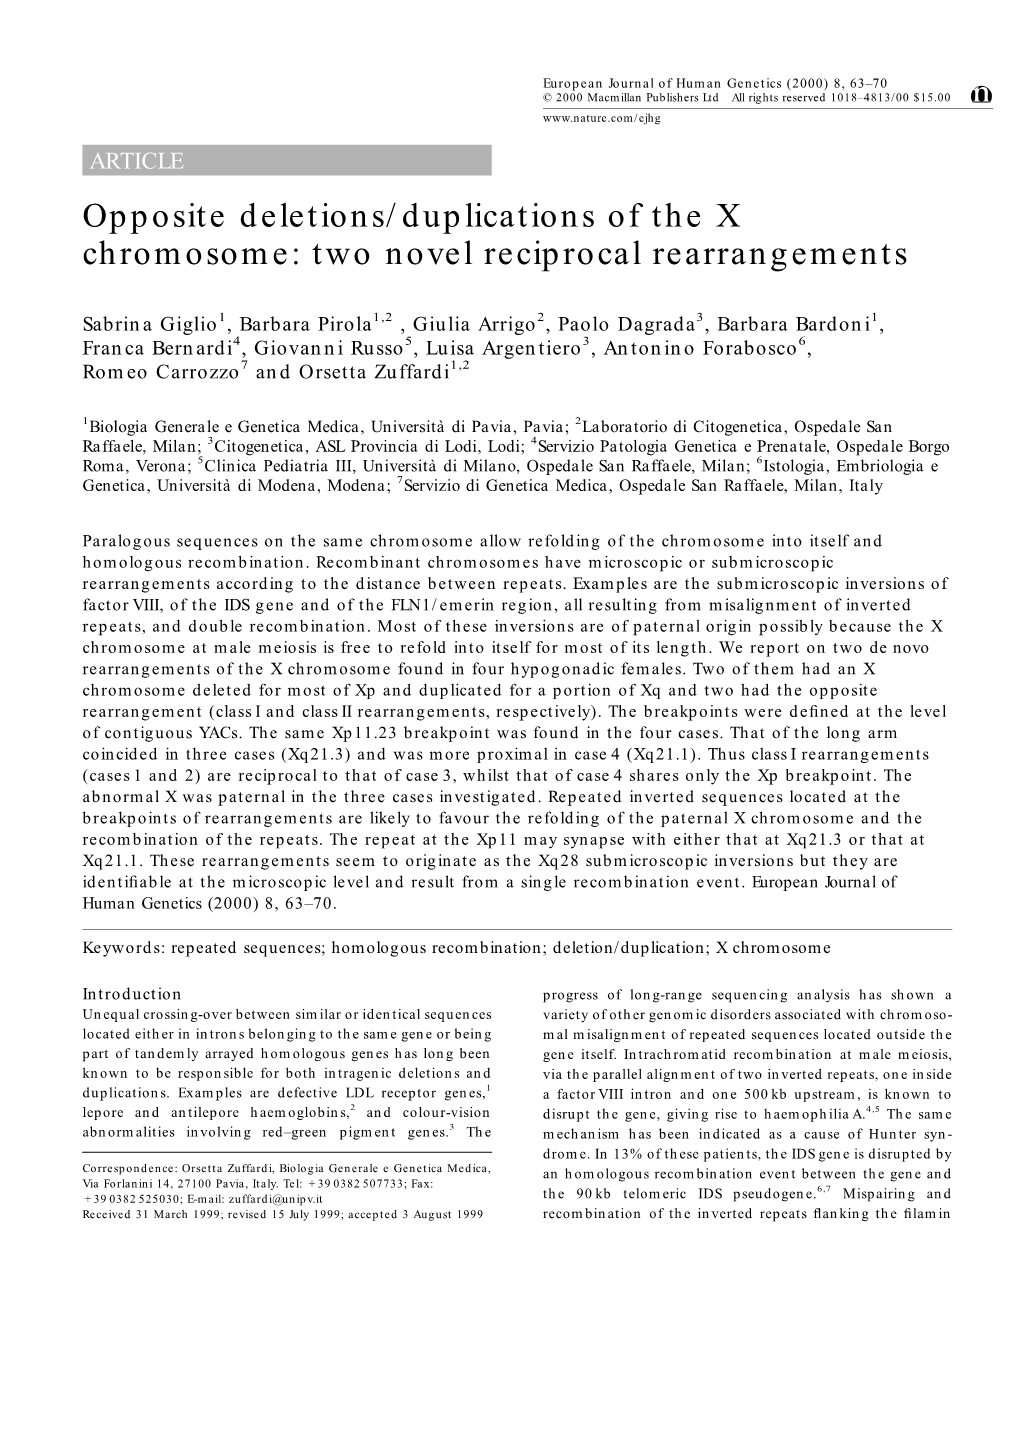 Opposite Deletions/Duplications of the X Chromosome: Two Novel Reciprocal Rearrangements